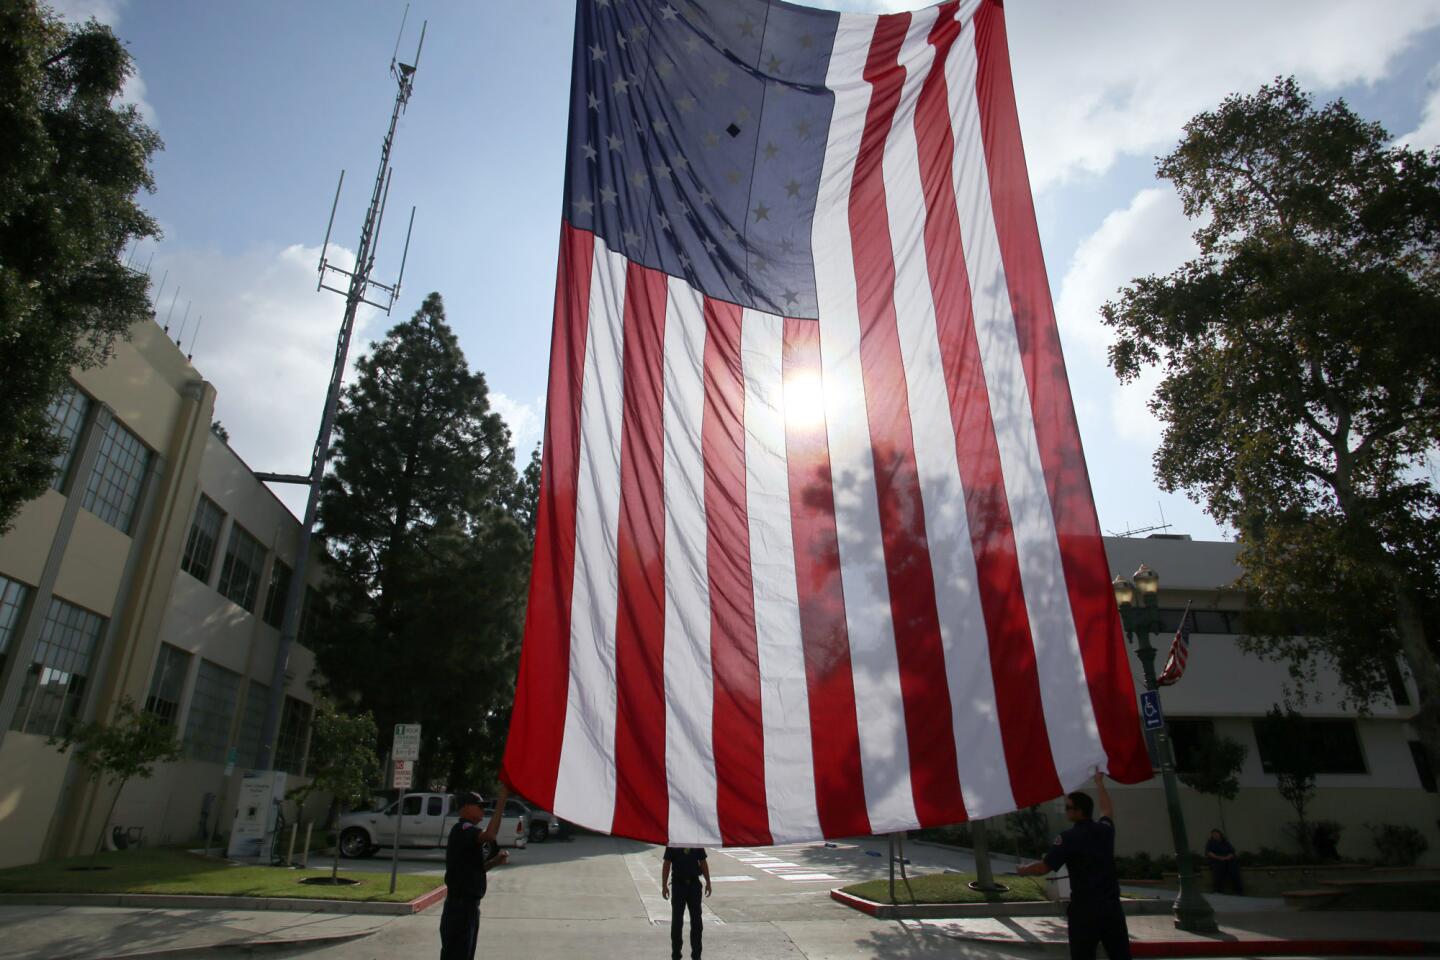 The flag of the United States of America is lowered by members of the Glendale Fire Department during a memorial ceremony on the 18th anniversary of the September 11 attacks, the ceremony took place in front of the Glendale Police Department on Isabel Street in Glendale, Ca., Wednesday, September 11, 2019. (photo by James Carbone)